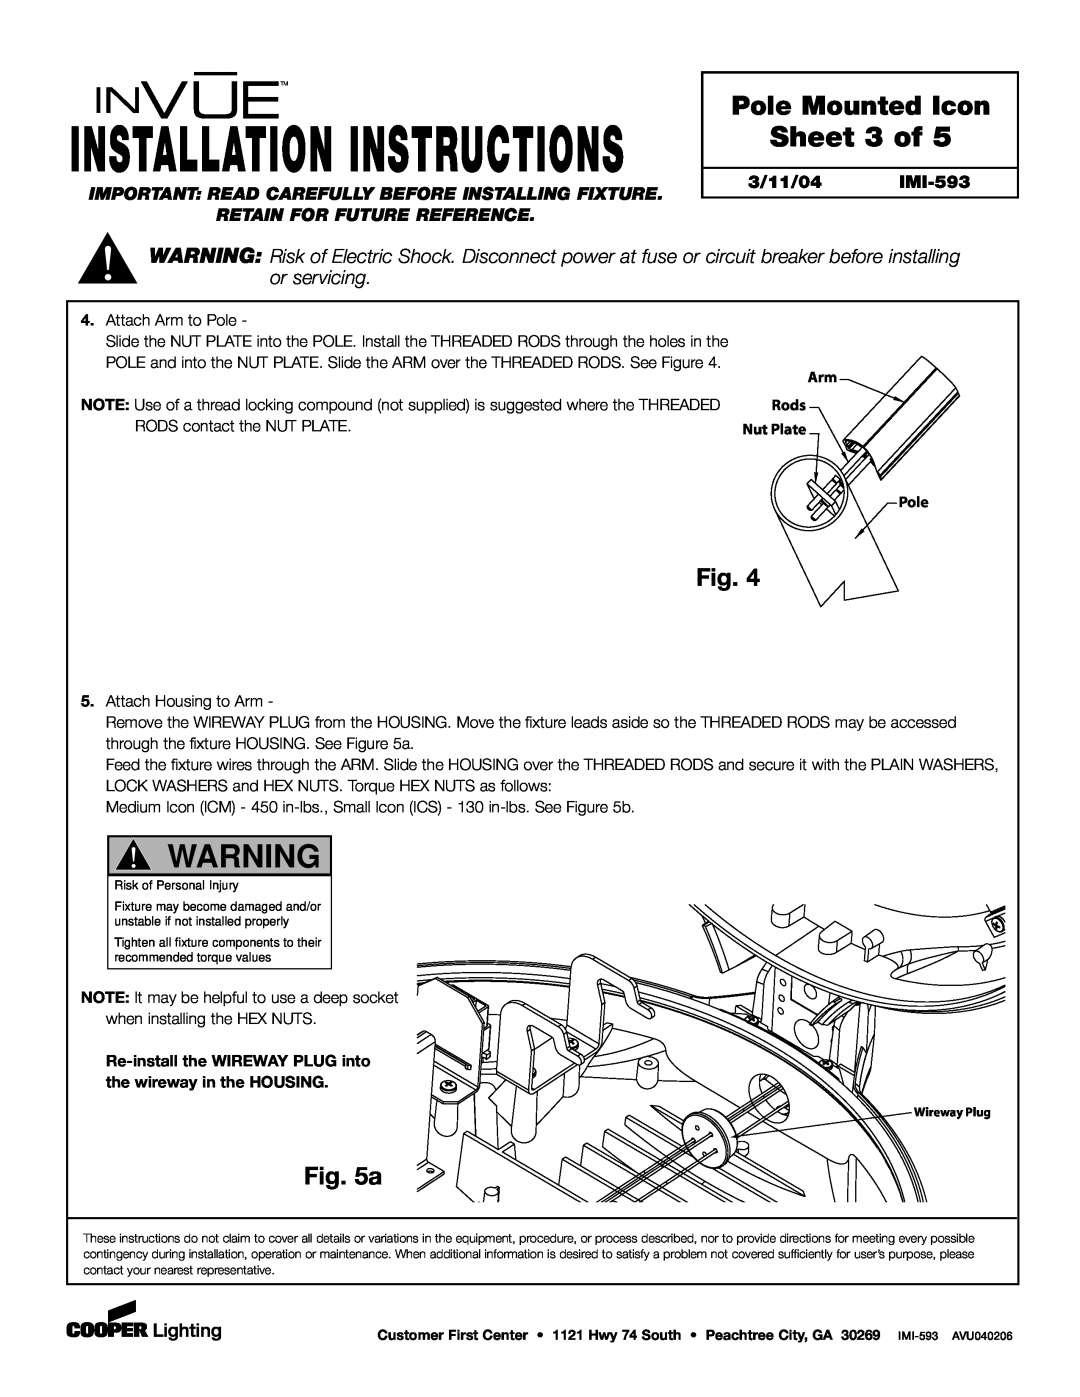 Cooper Lighting Pole Mount Icon Sheet 3 of, Installation Instructions, Pole Mounted Icon, Retain For Future Reference 